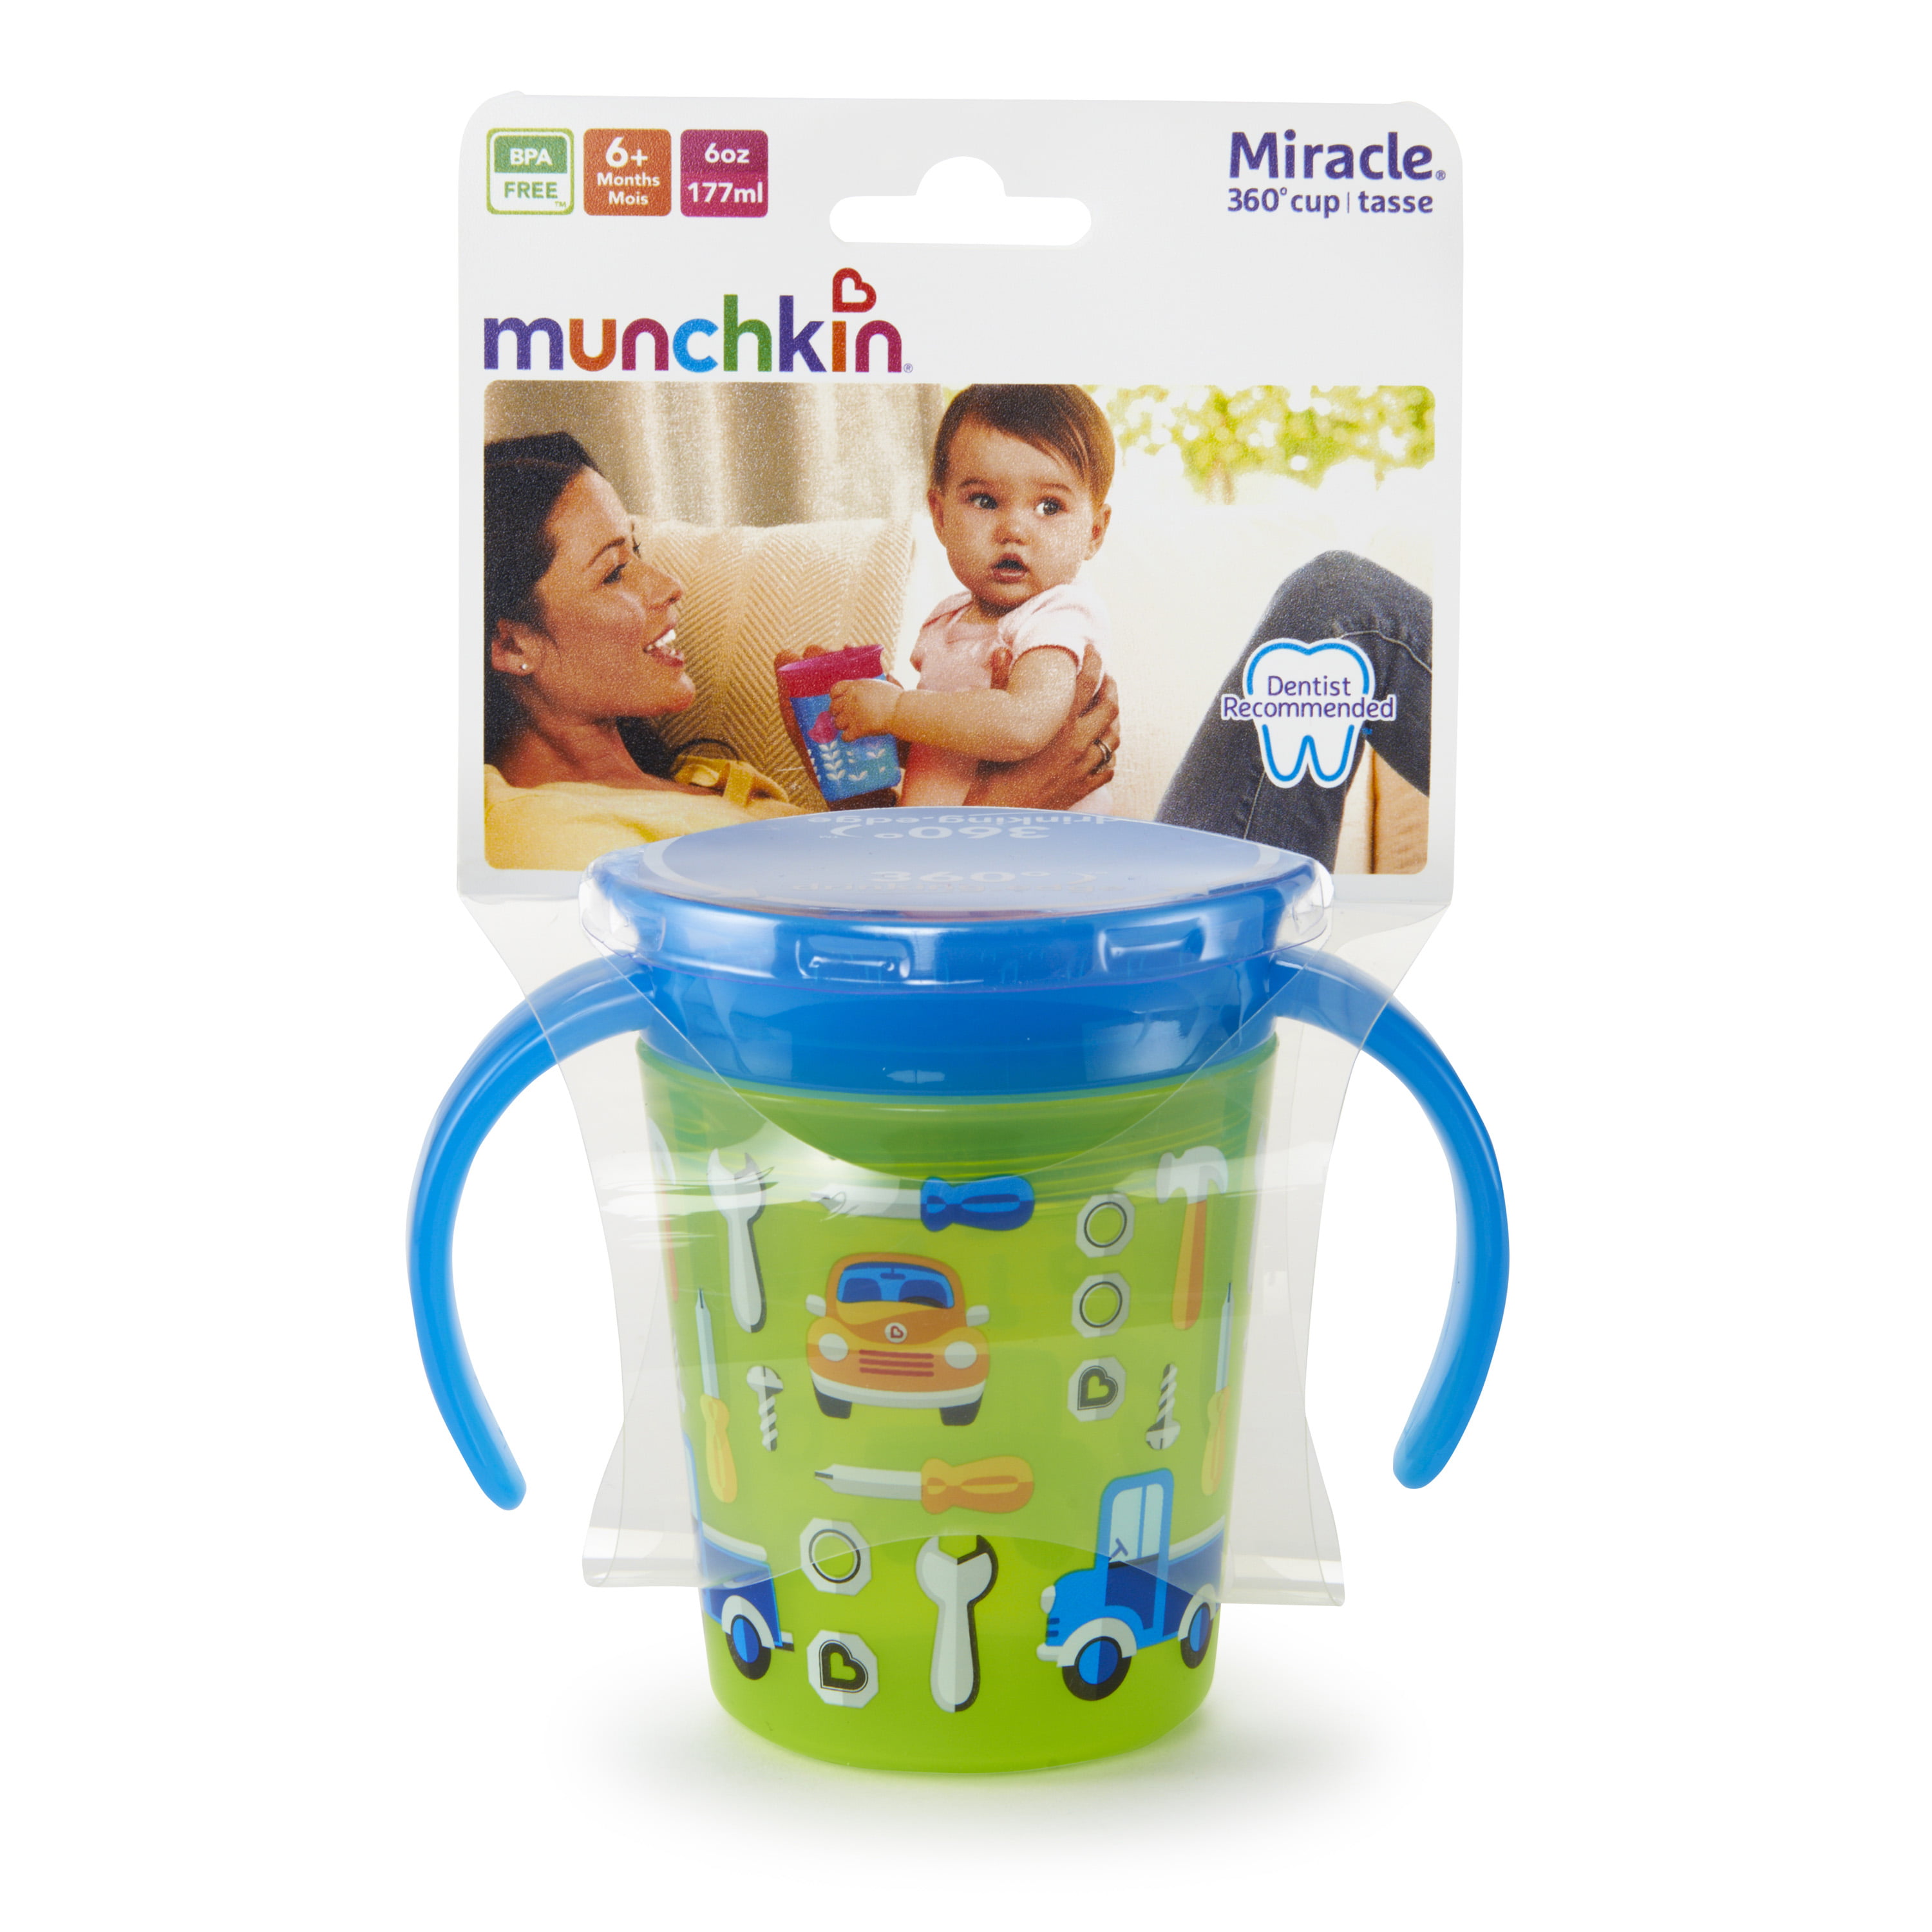 6oz/177ml Munchkin Miracle 360 Deco Trainer Cup Pink Bird 